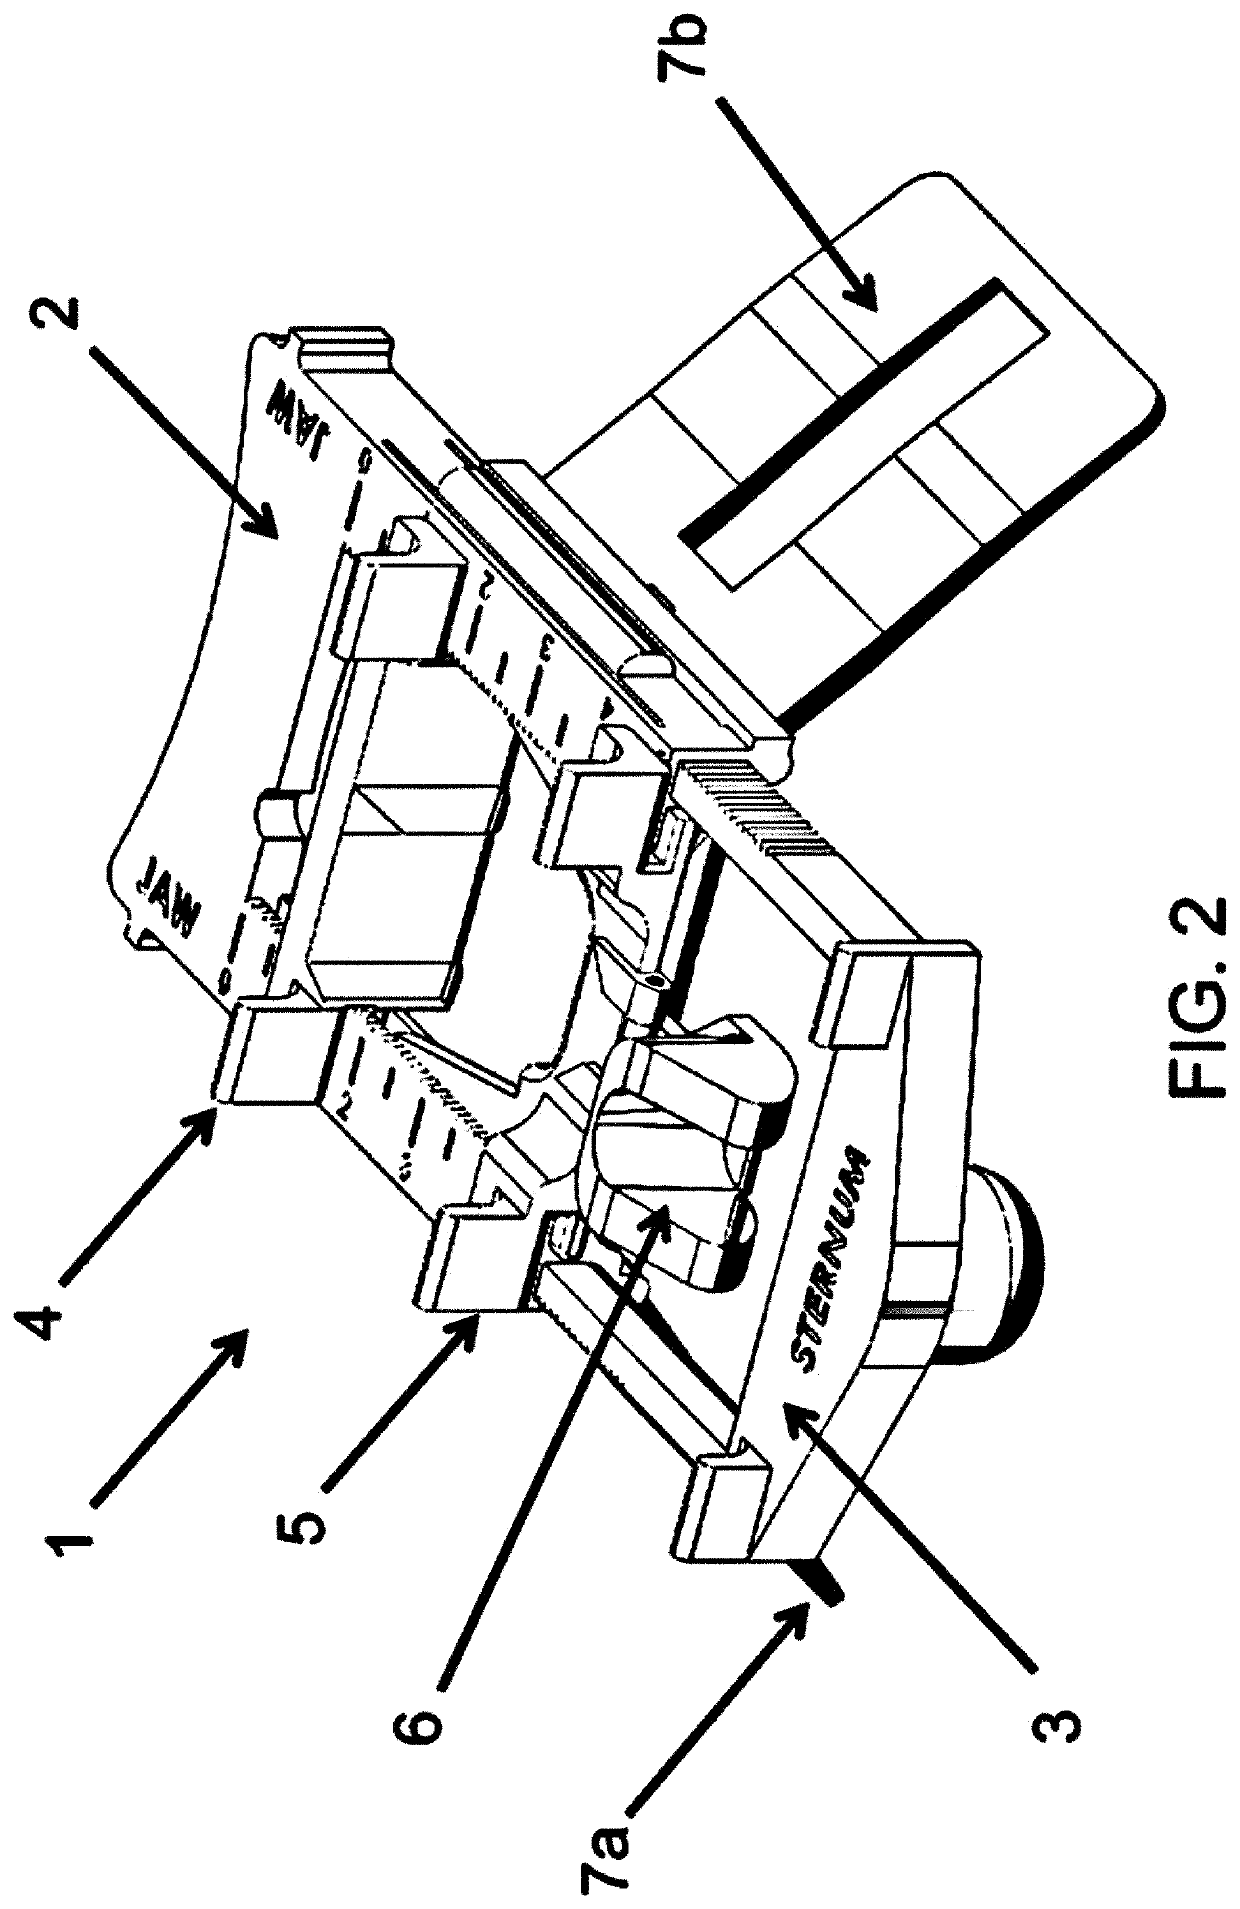 Assist device for medical procedures